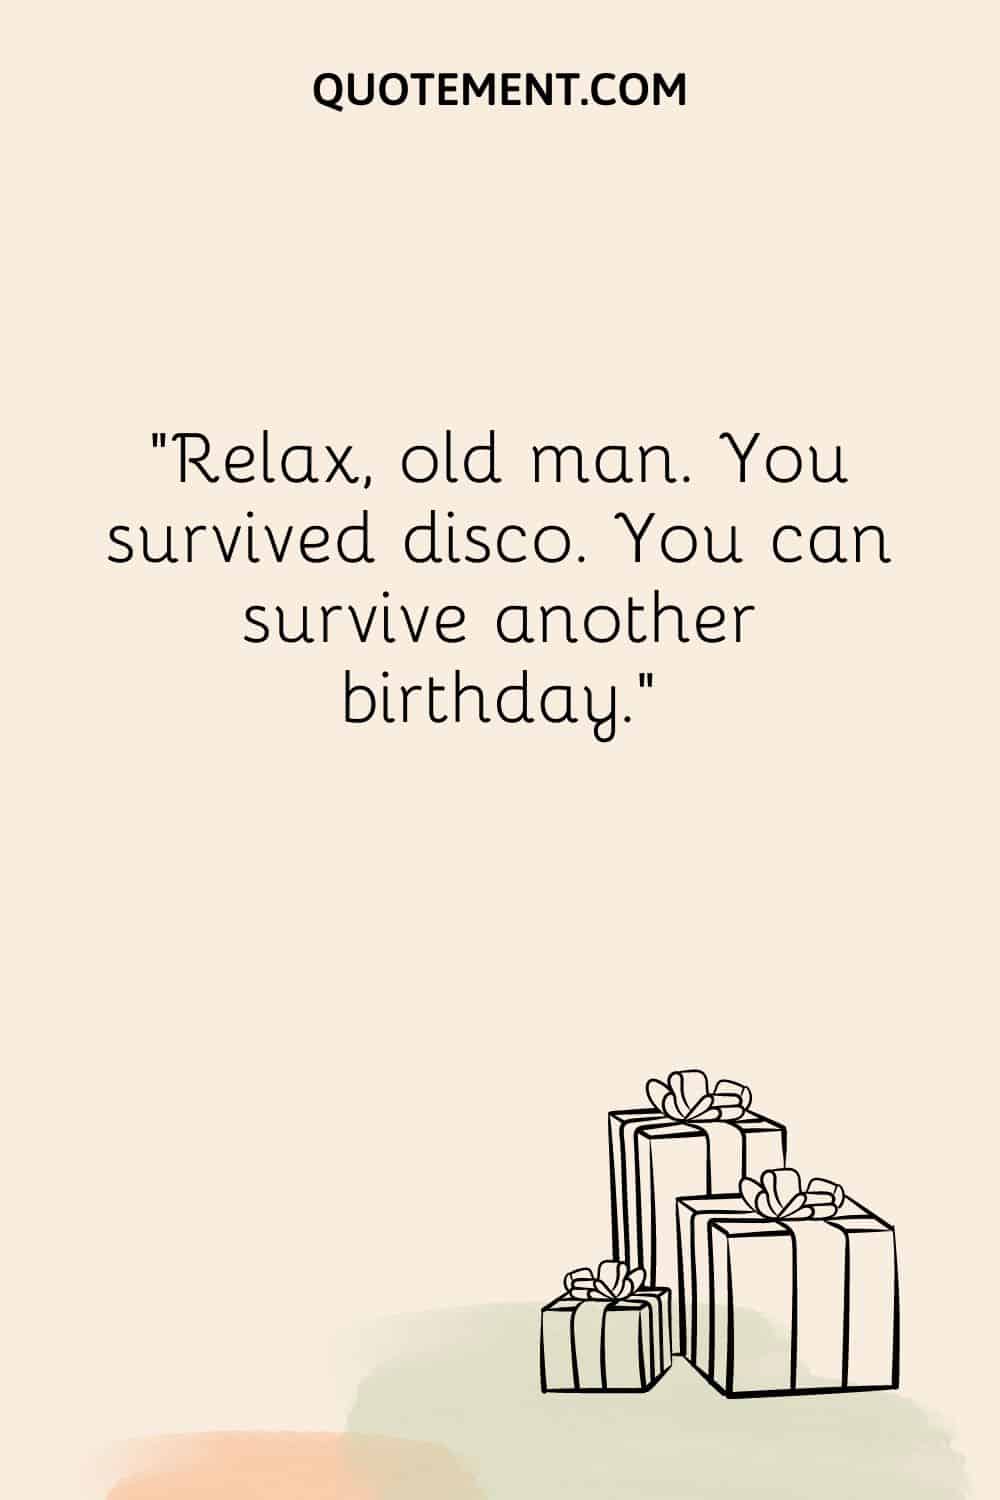 Relax, old man. You survived disco. You can survive another birthday